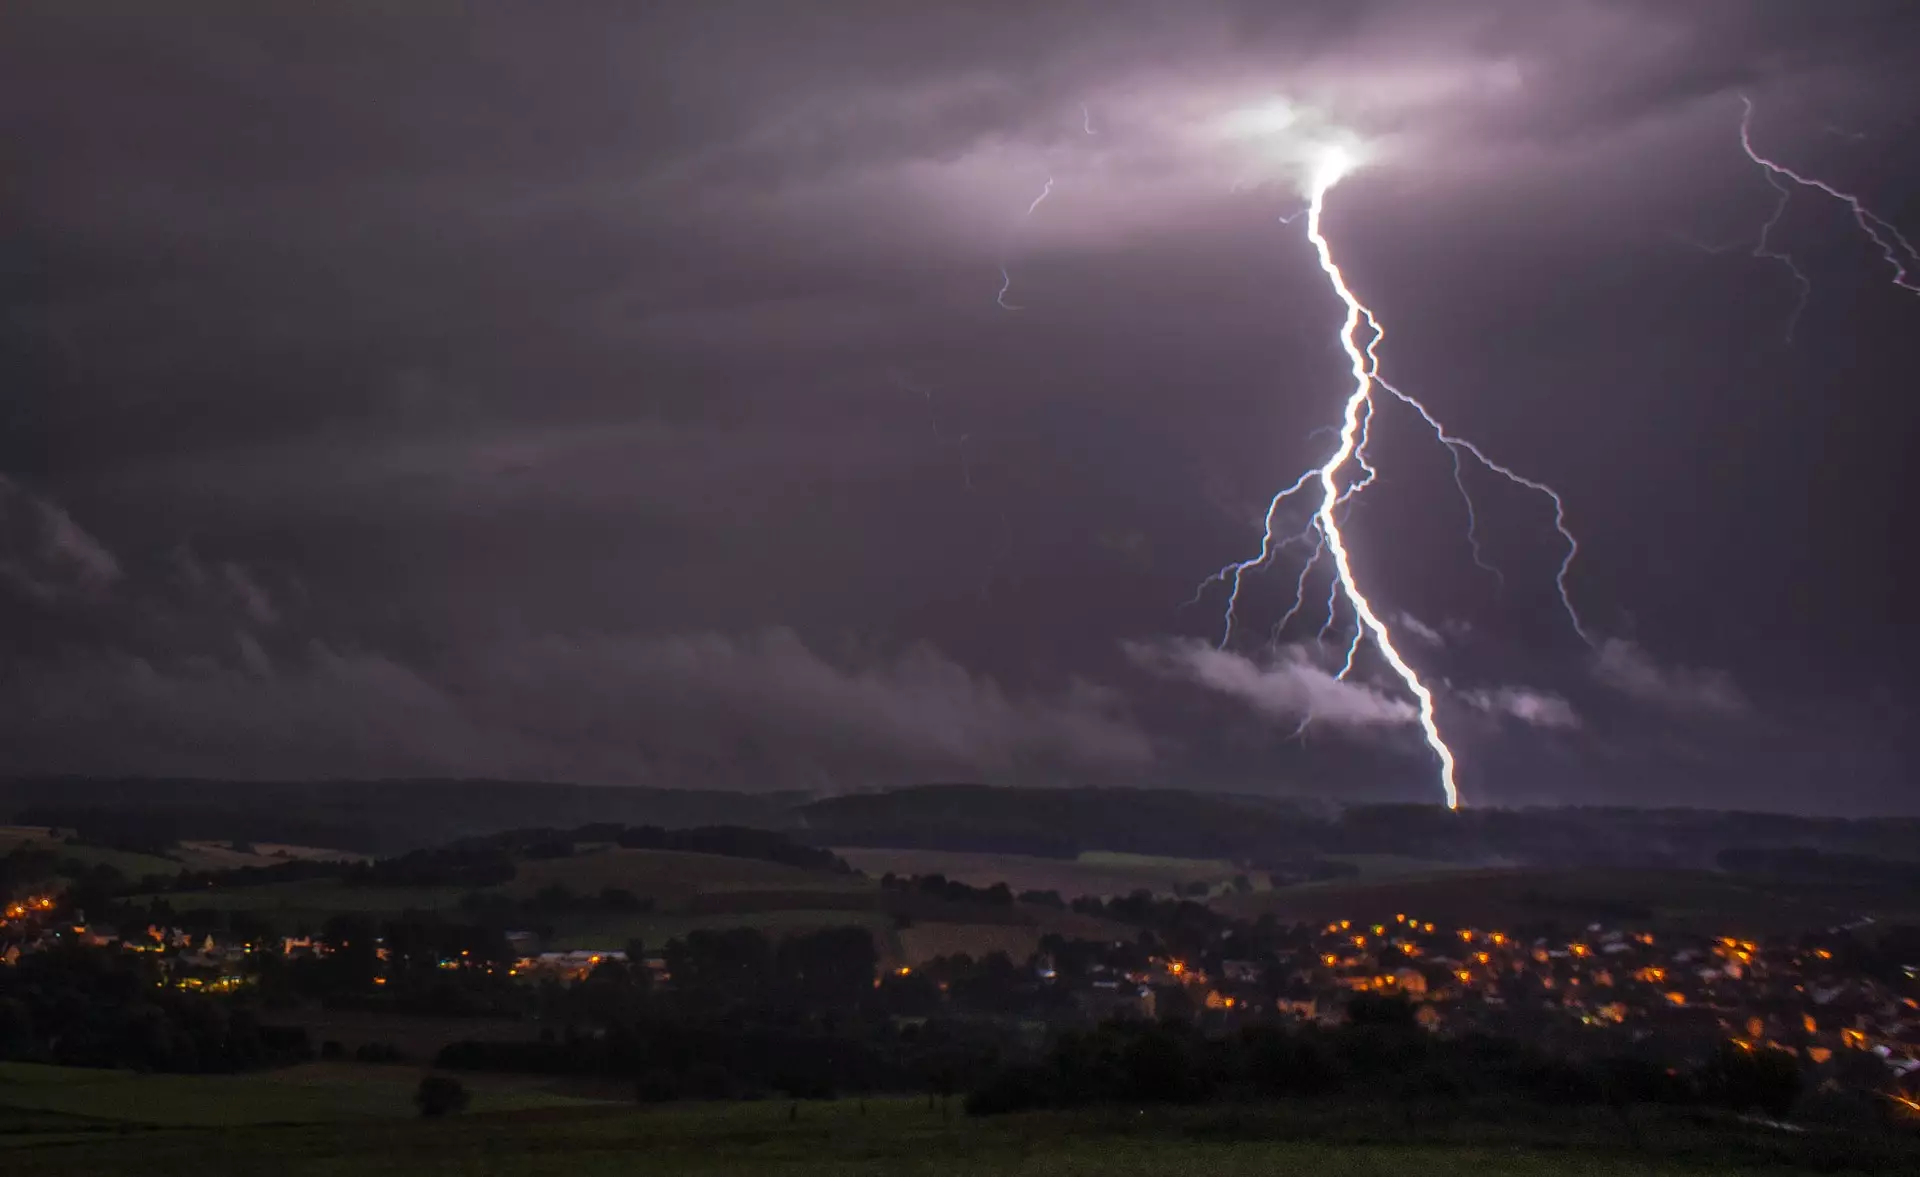 Thunderstorms could pop up anywhere in the UK (